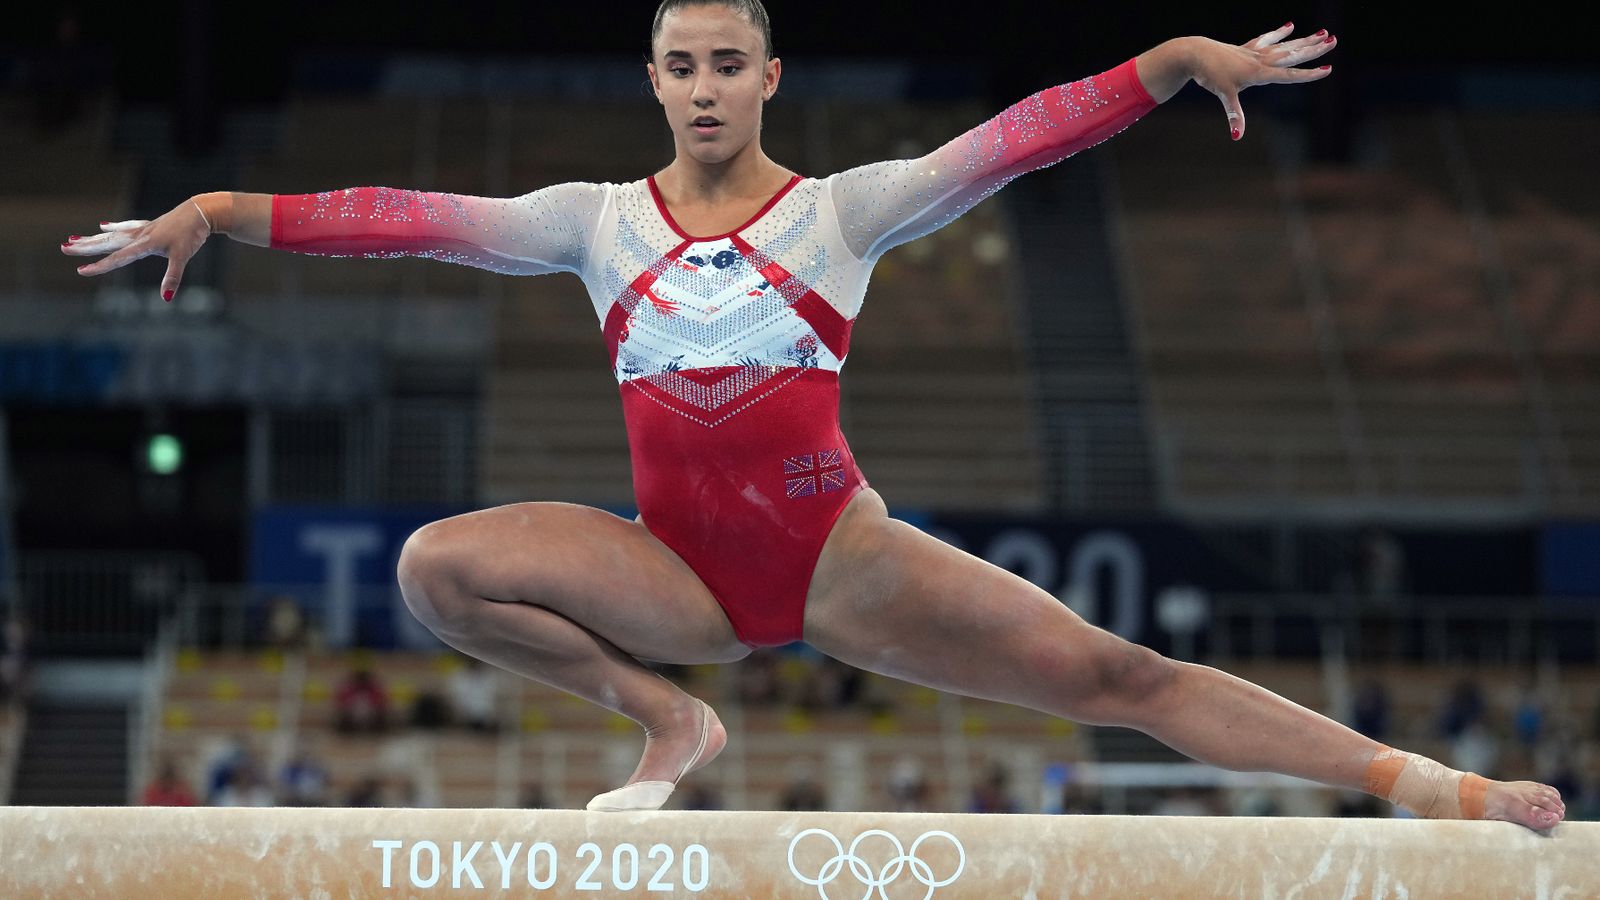 Tokyo 2020: Team GB's women's gymnastics team win Olympic bronze to claim first medal in event in 93 years